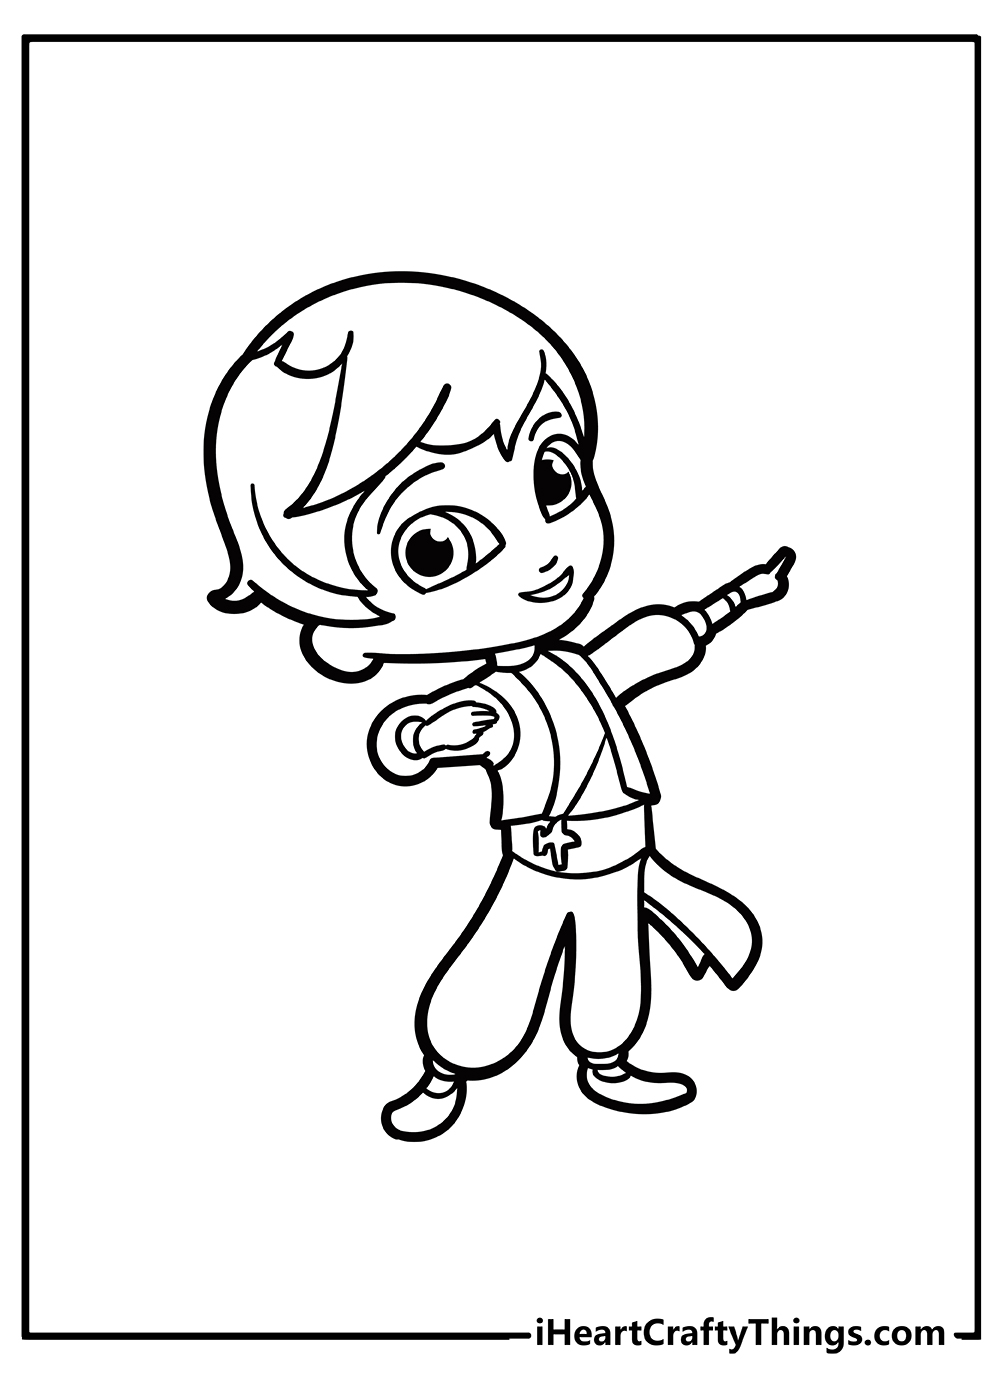 Shimmer and Shine Coloring Pages for preschoolers free printable